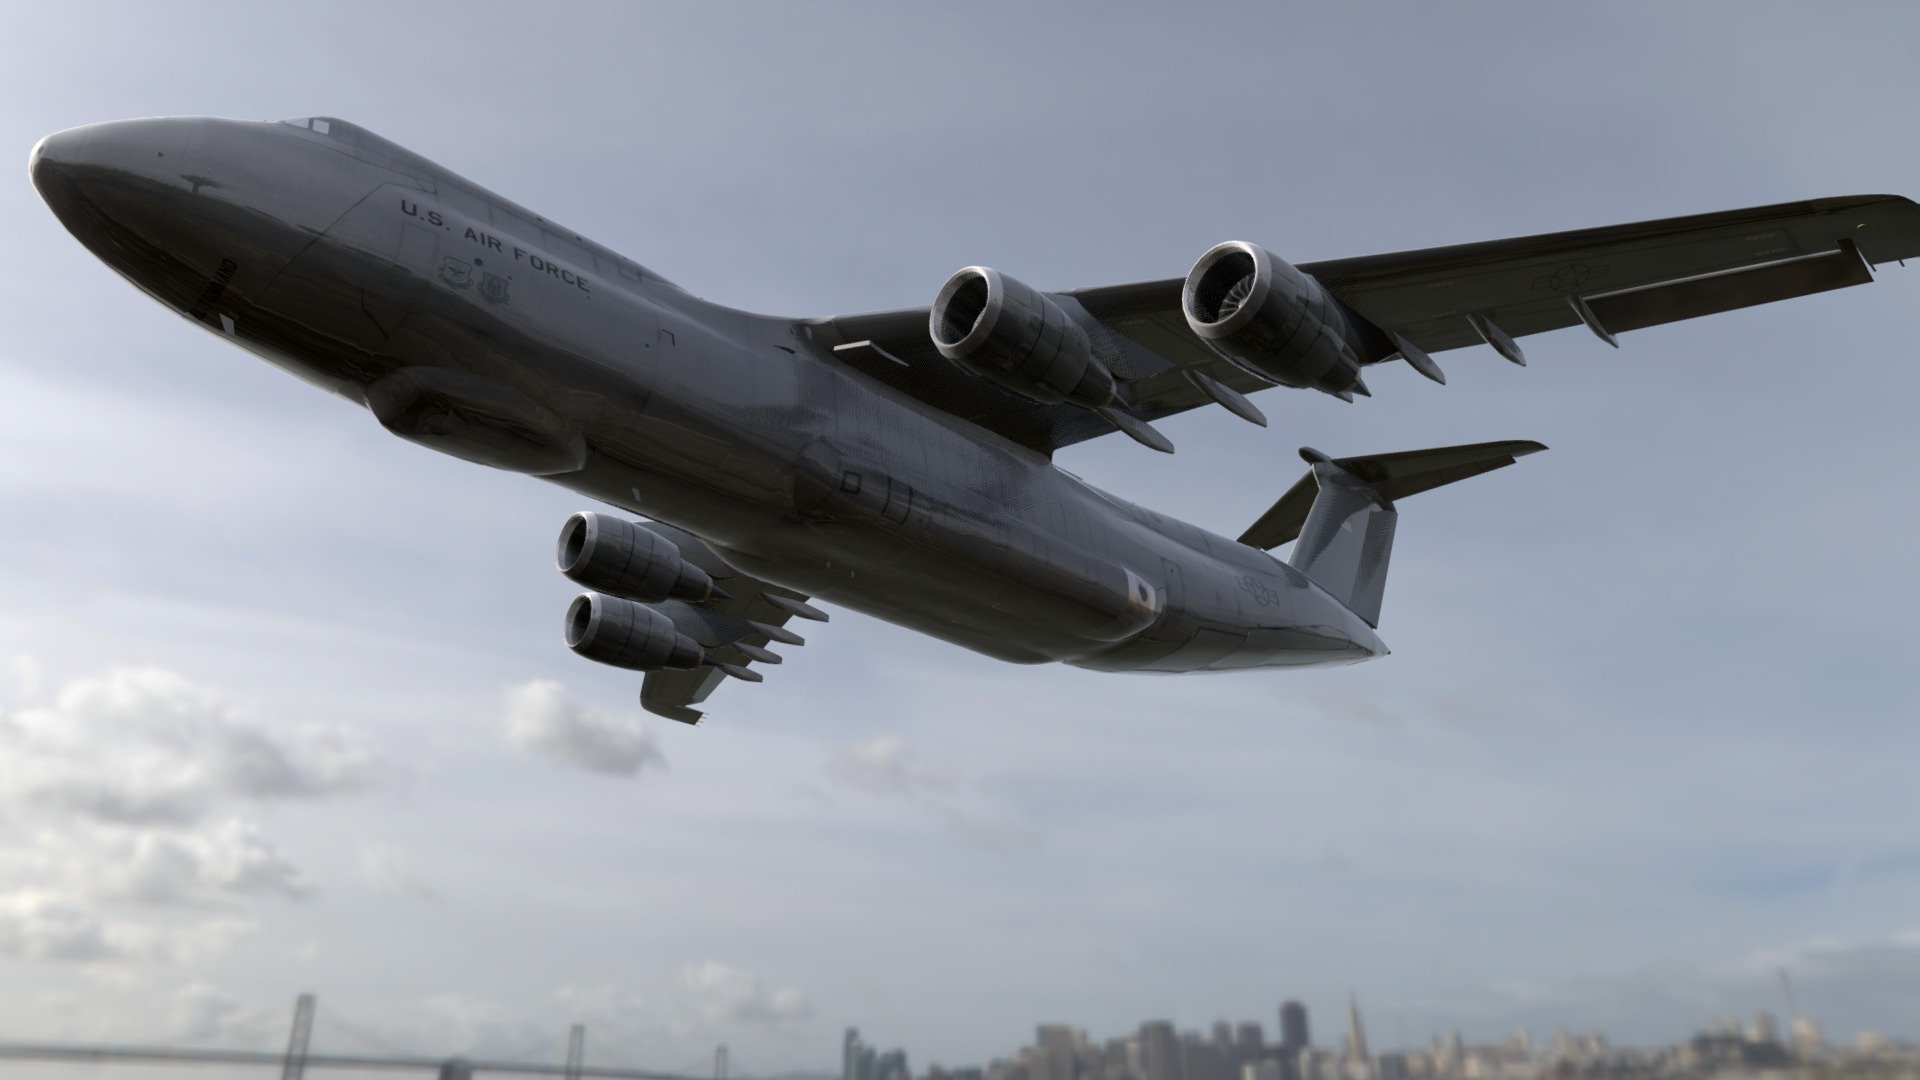 Hello friends i create a Webpage,includes secret server ip addresses Visit Top secret Server Locations for direct movies ,games and origional files download: http://turboagram.com/E7Pm - US Cargo Plane with Real World Graphics - 3D model by ABHISHEK VERMA , 3D Designer (@abhishekverma) 3d model